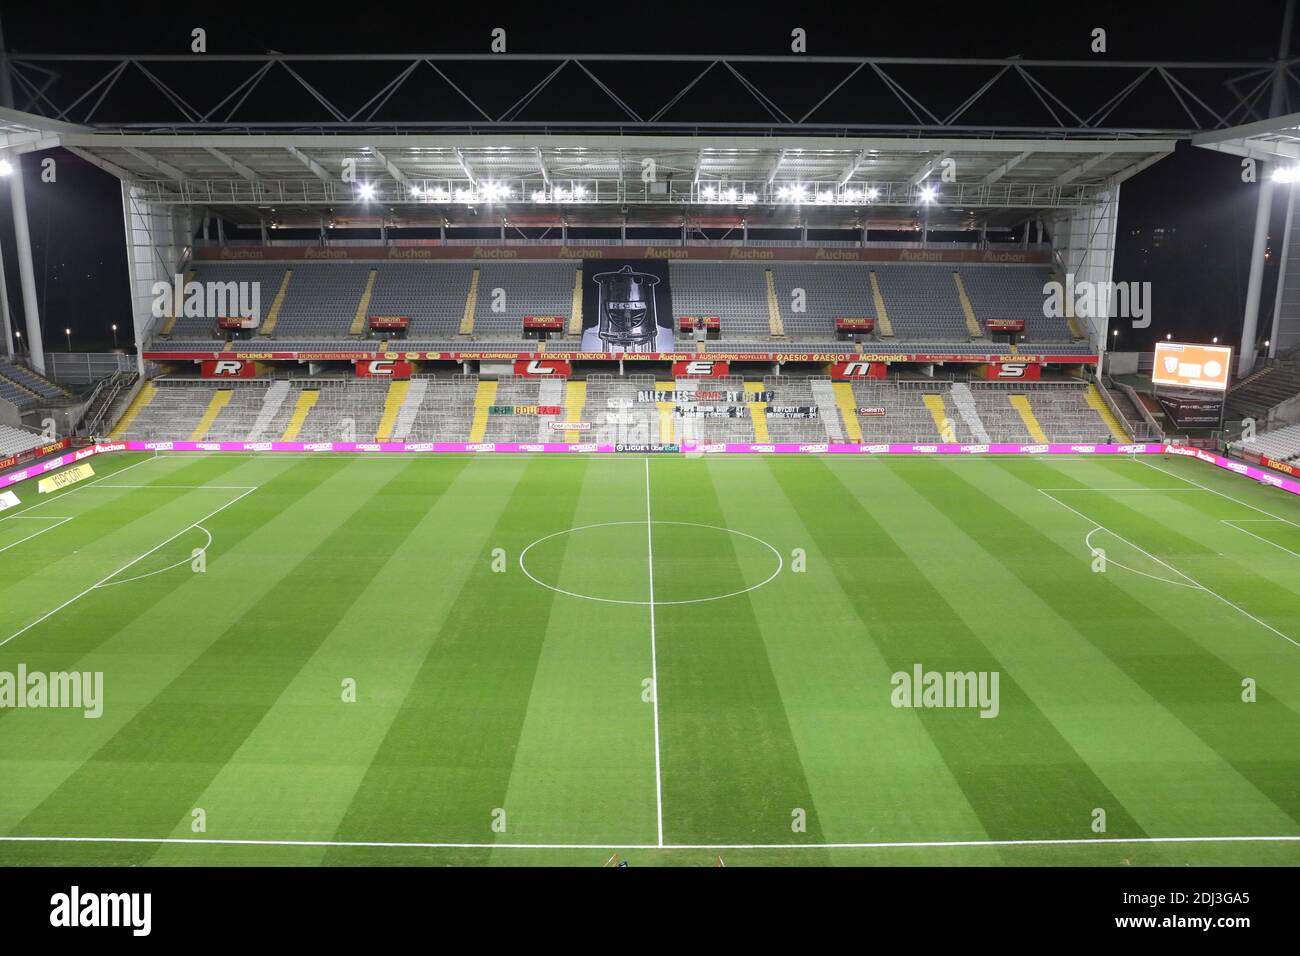 General views at Stade Bollaert-Delelis on February 2, 2016 in